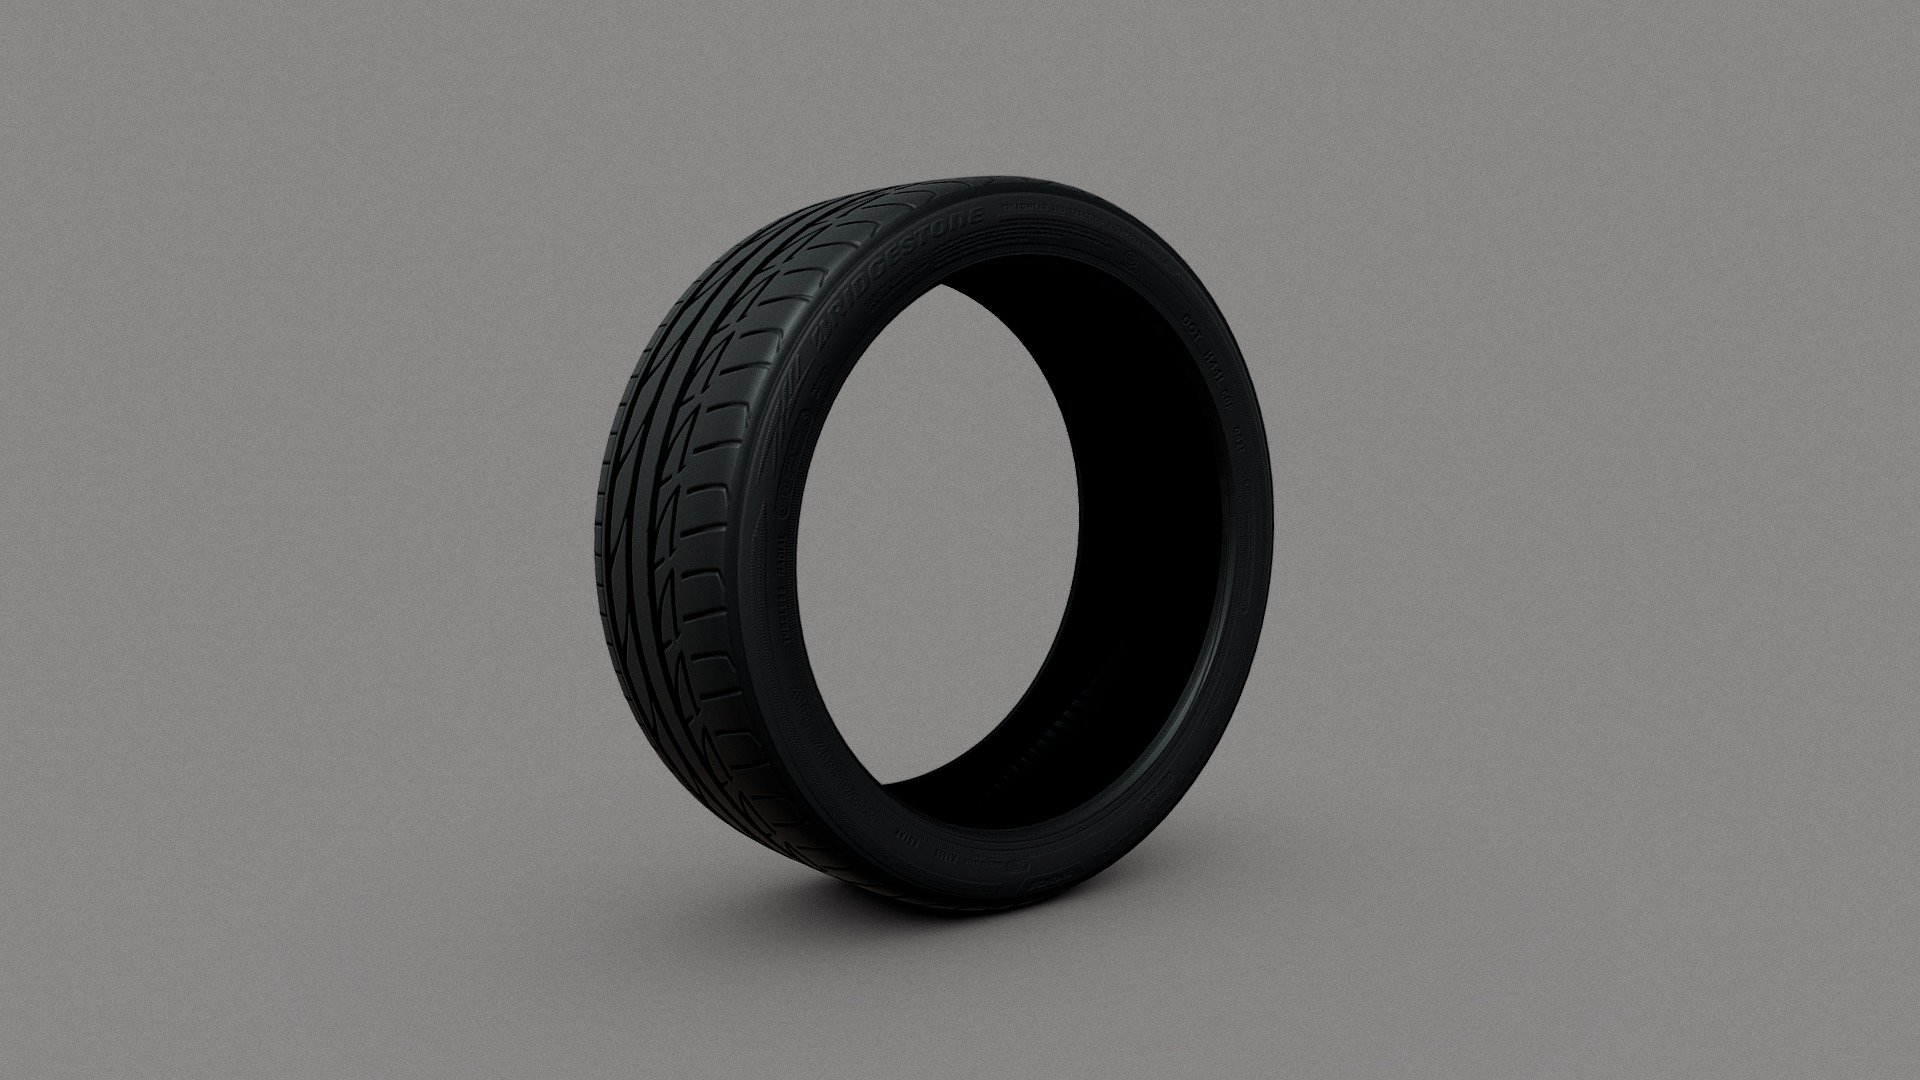 Bridgestone Potenza R17 

Modeled in Lightwave 3d, textured in Marmoset, with the help of Adobe Illustrator and Photoshop.

Some help from the NormalmapOnline site 3d model